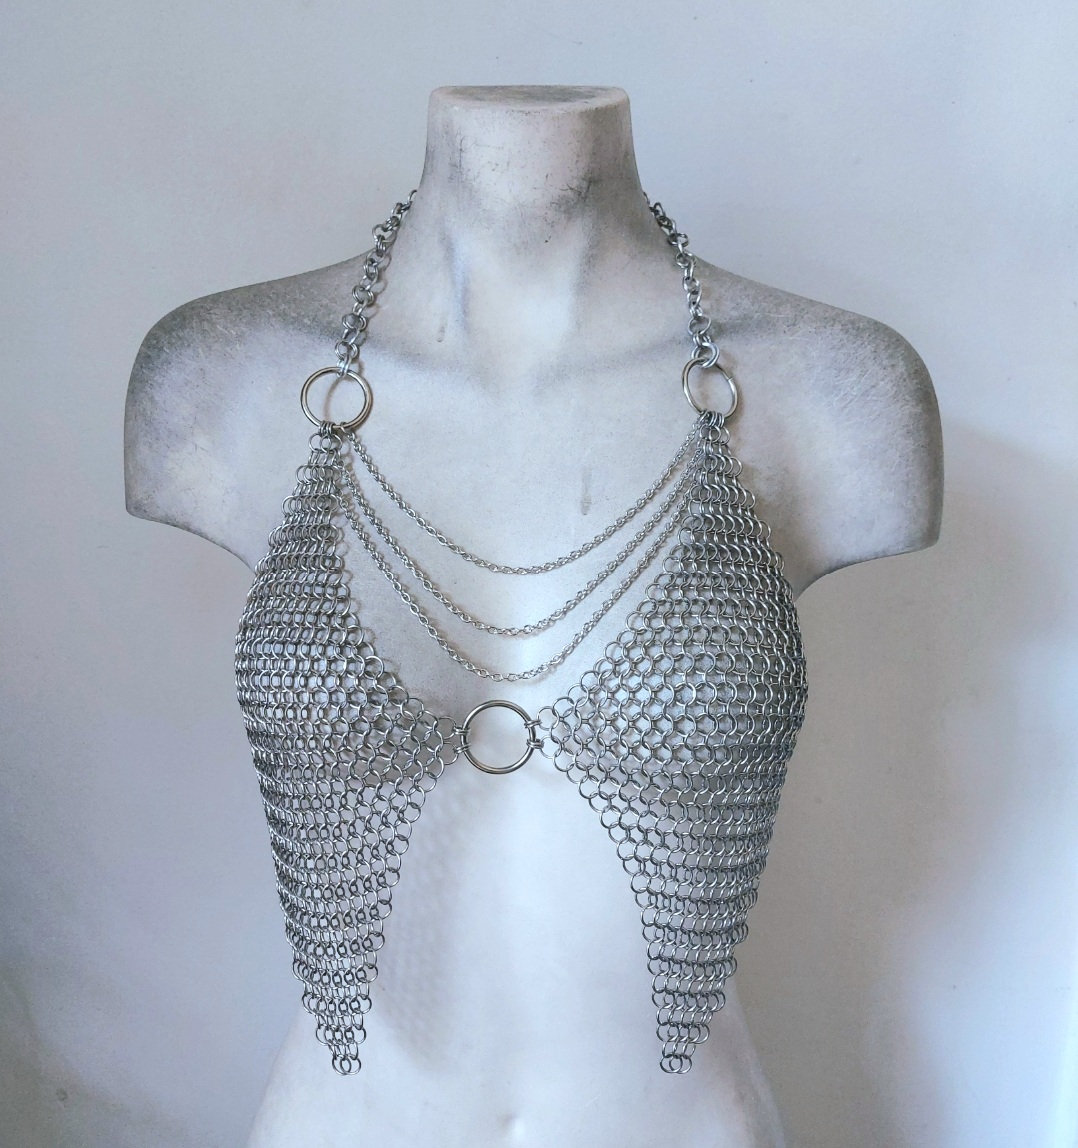 Chainmail Breastplate, Unisex, Halter Top, 4 in 1 Chainmail Front With Open  Back, Full-persian at Neck and Across Back, One Size Fits Most 